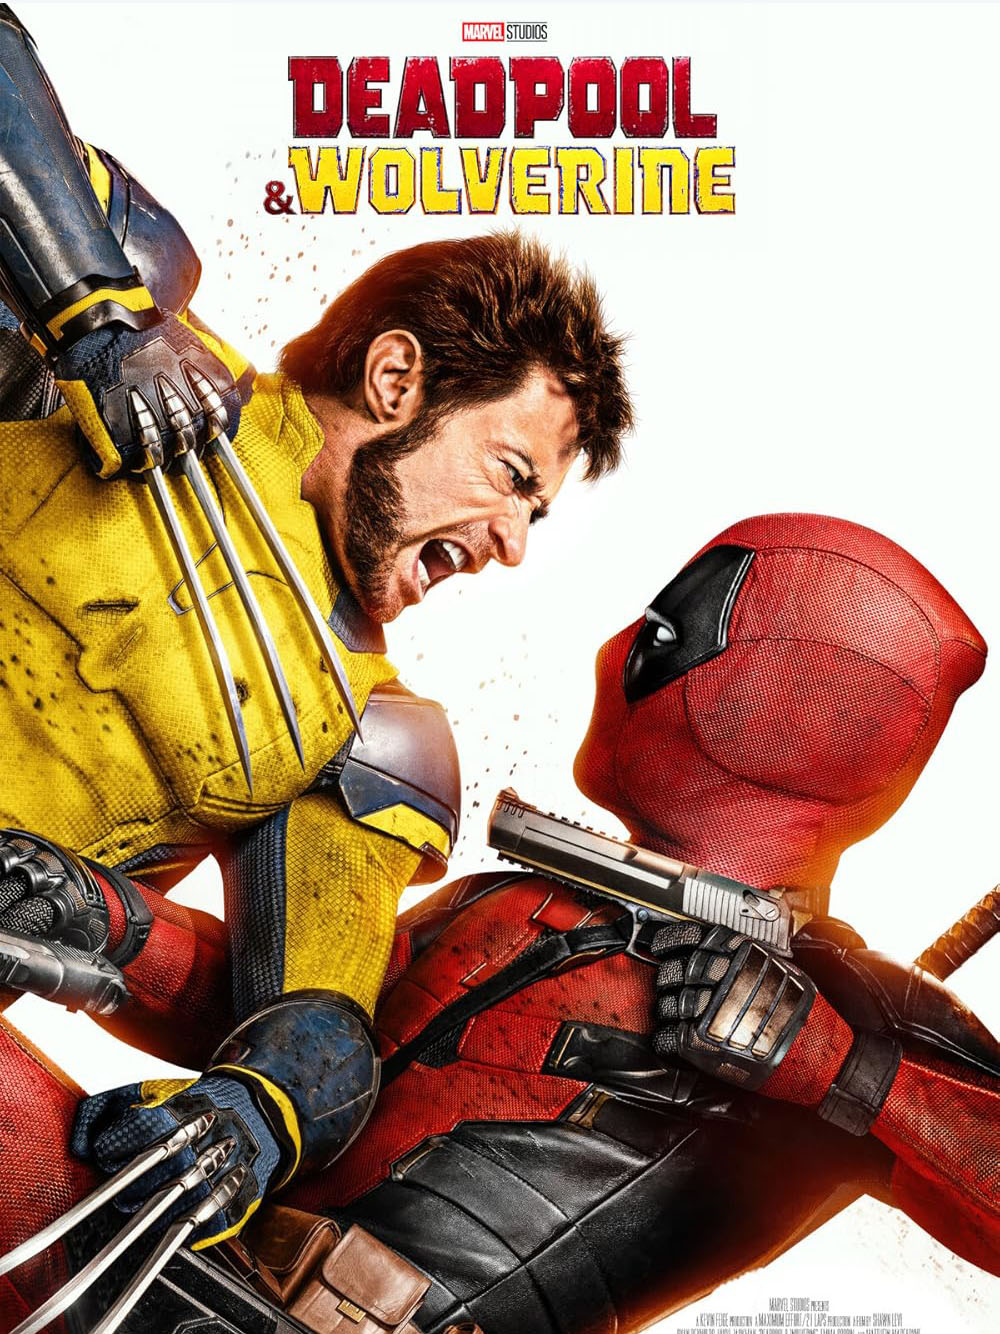 Photo: Movie poster for "Deadpool & Wolverine" featuring the two heroes in their suits. On the left is Wolverine, in a yellow suit pointing his claws at Deadpool in his read on the right, who is brandishing a gun